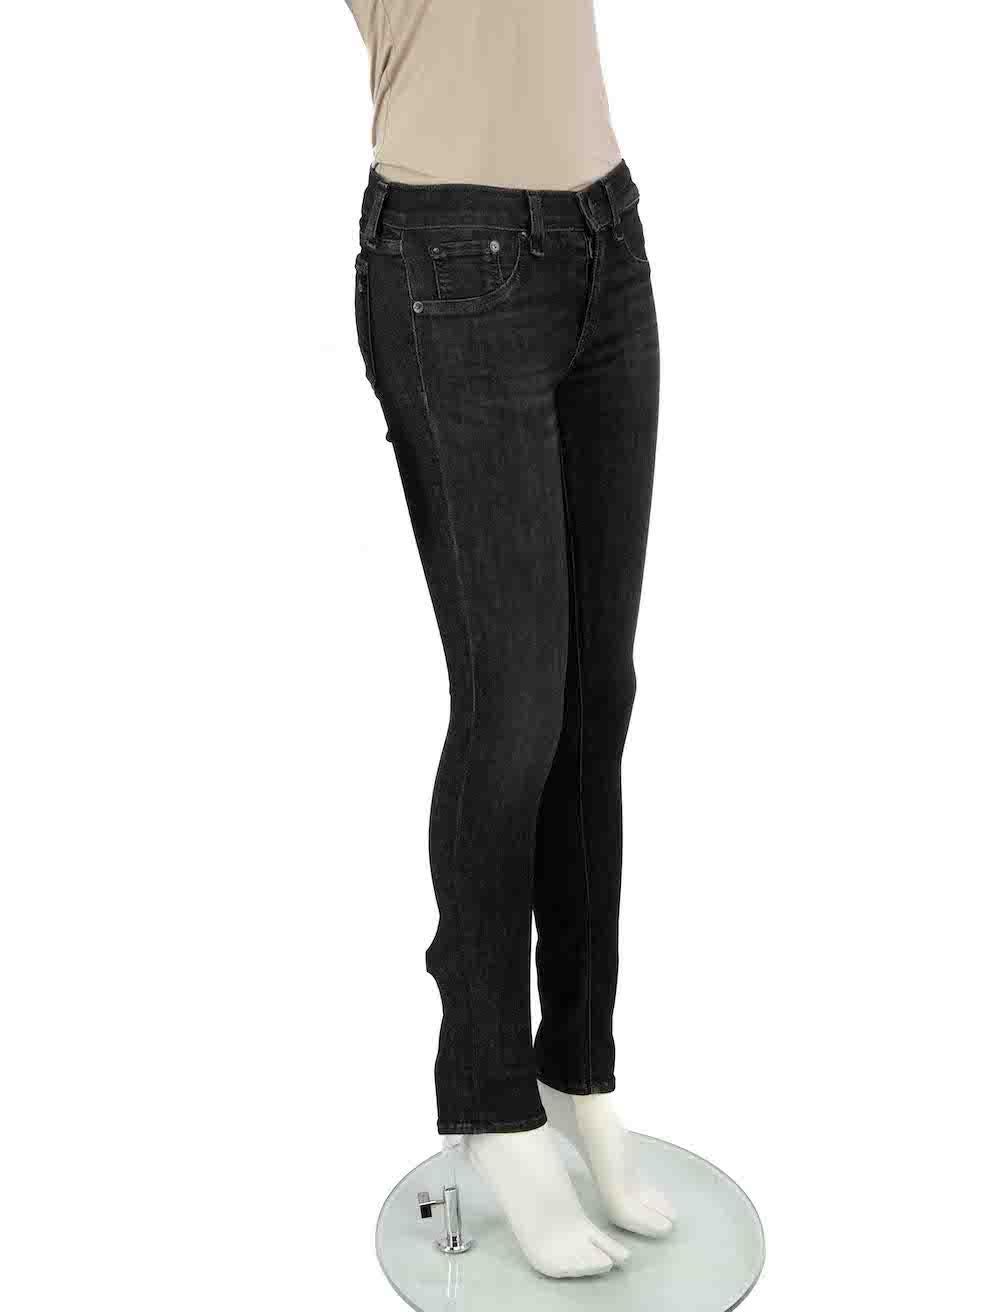 CONDITION is Very good. Hardly any visible wear to jeans is evident on this used Rag & Bone designer resale item.
 
 Details
 Black
 Denim
 Jeans
 Skinny fit
 Mid rise
 3x Front pockets
 2x Back pockets
 
 
 Made in USA
 
 Composition
 69% Cotton,